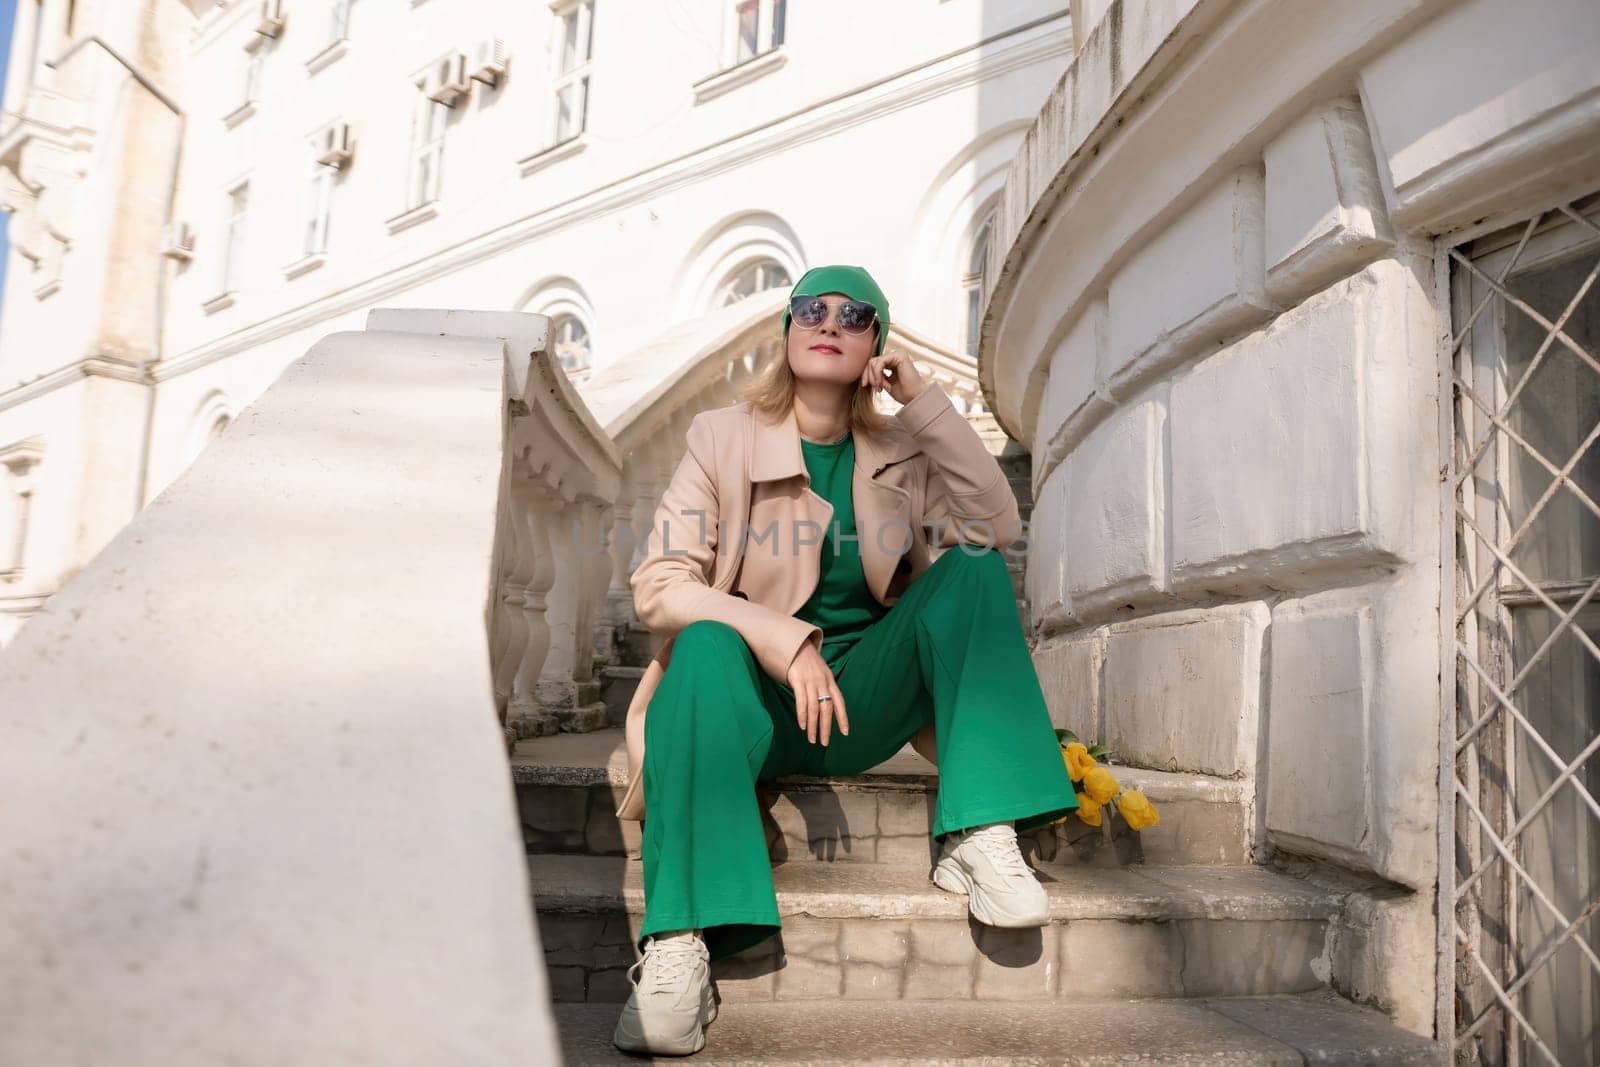 A woman in a green outfit is sitting on a set of stairs. She is wearing a green hat and sunglasses. by Matiunina